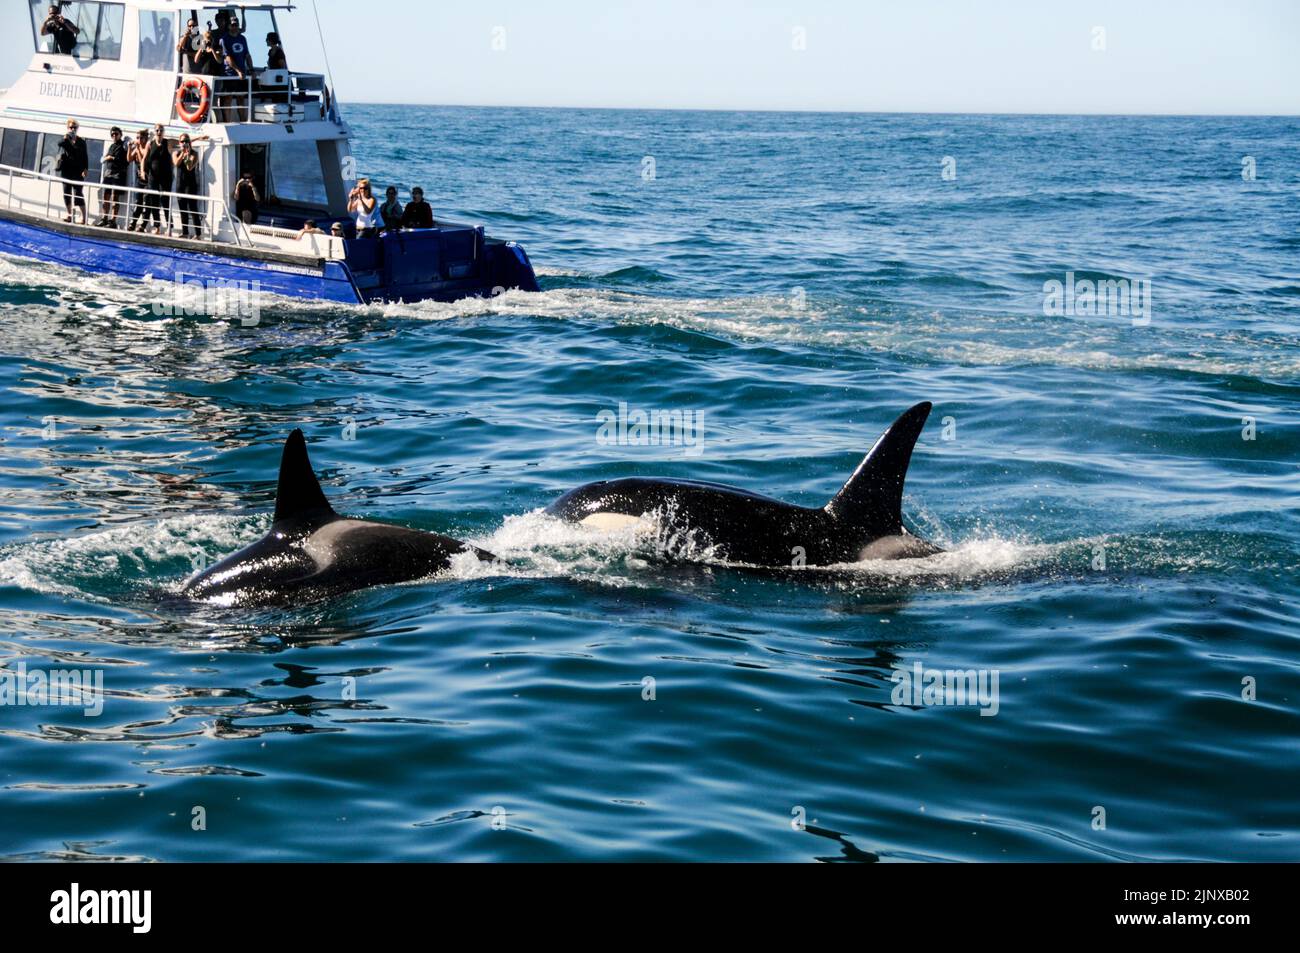 A pair of Orcas or killer Whales were sighted in the Pacific Ocean near the town of Kaikoura on the east coast of South Island in New Zealand. Stock Photo